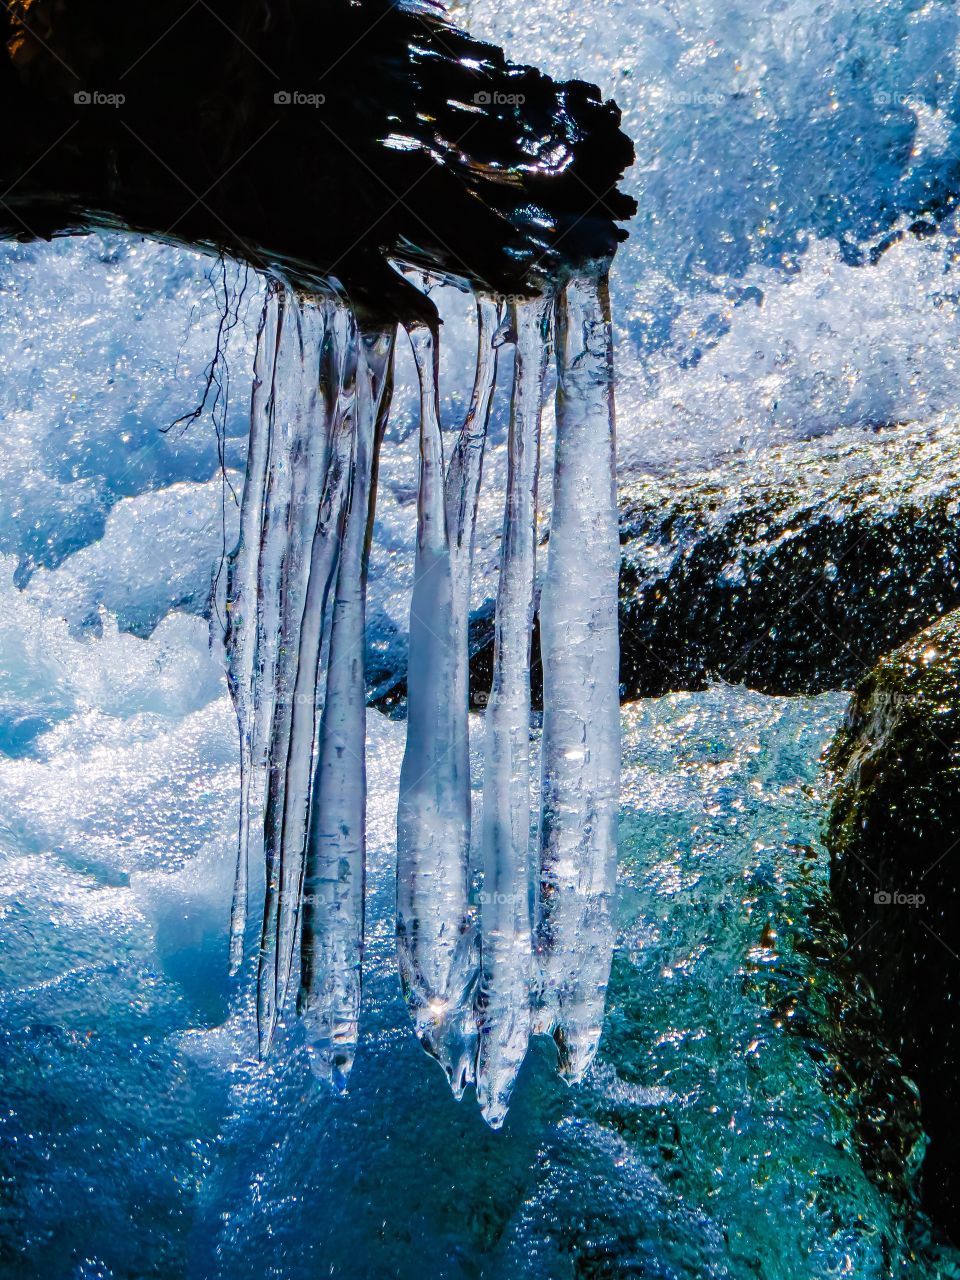 Water: Frozen and Flowing